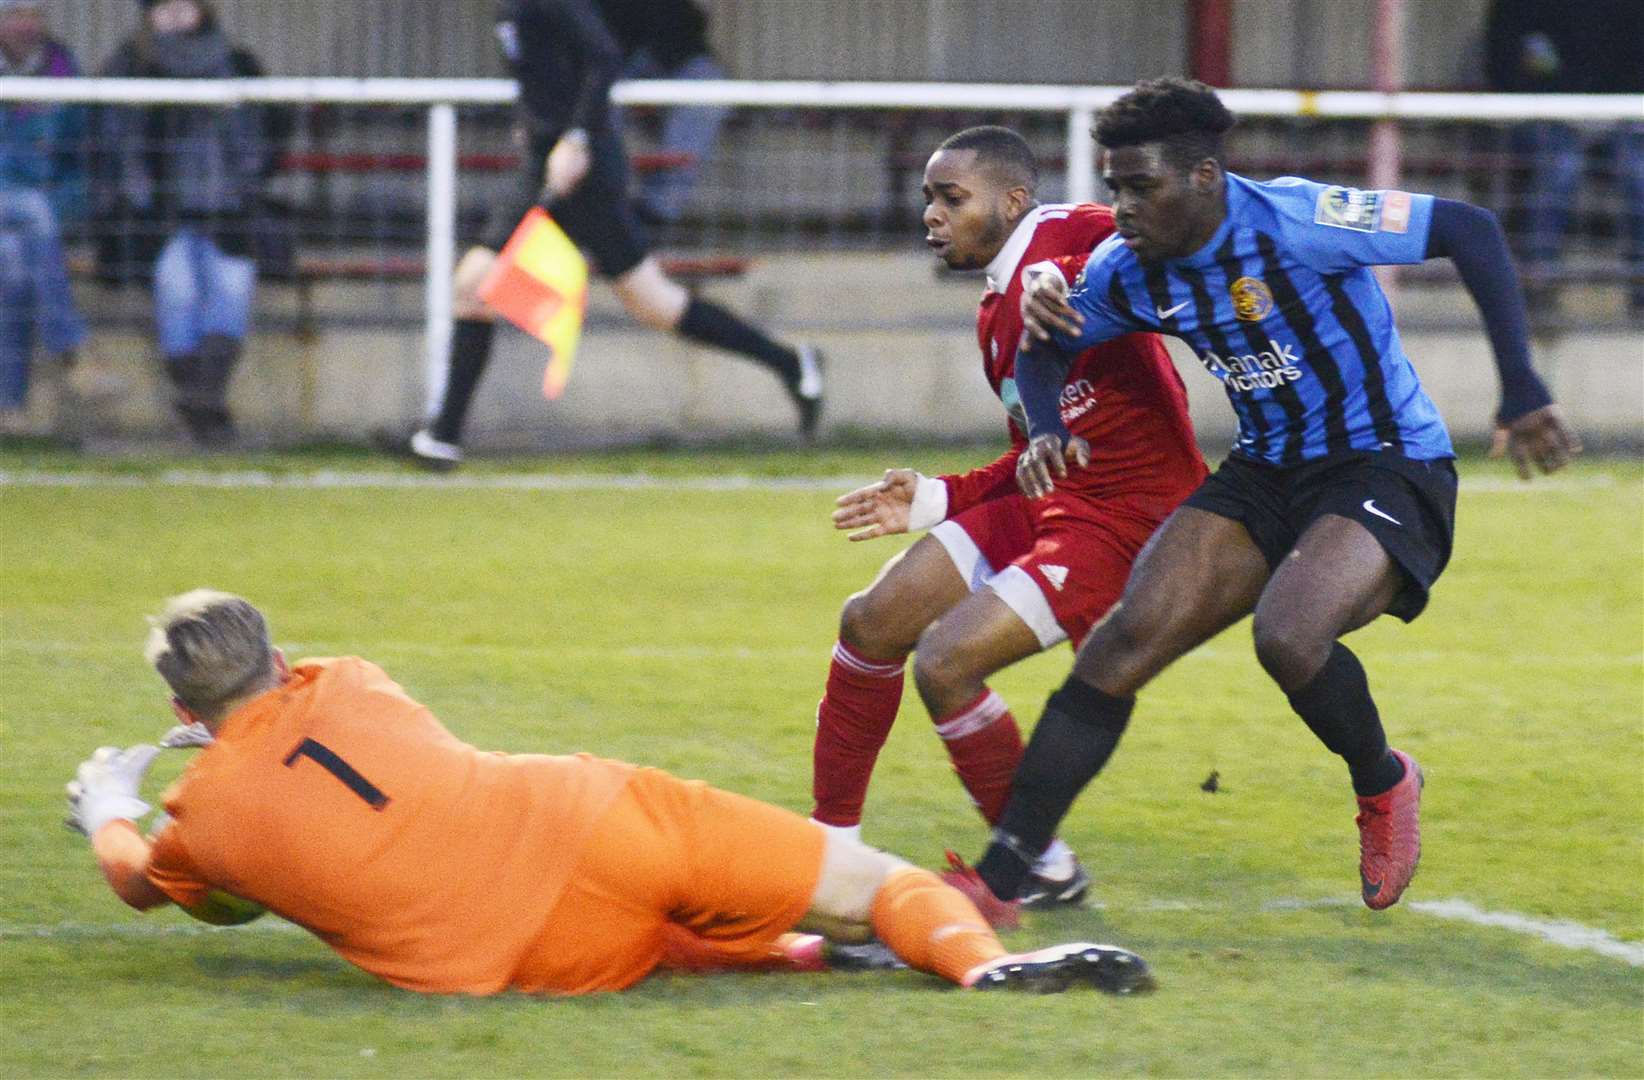 Kieron Campbell is denied by the Sevenoaks goalkeeper Picture: Paul Amos